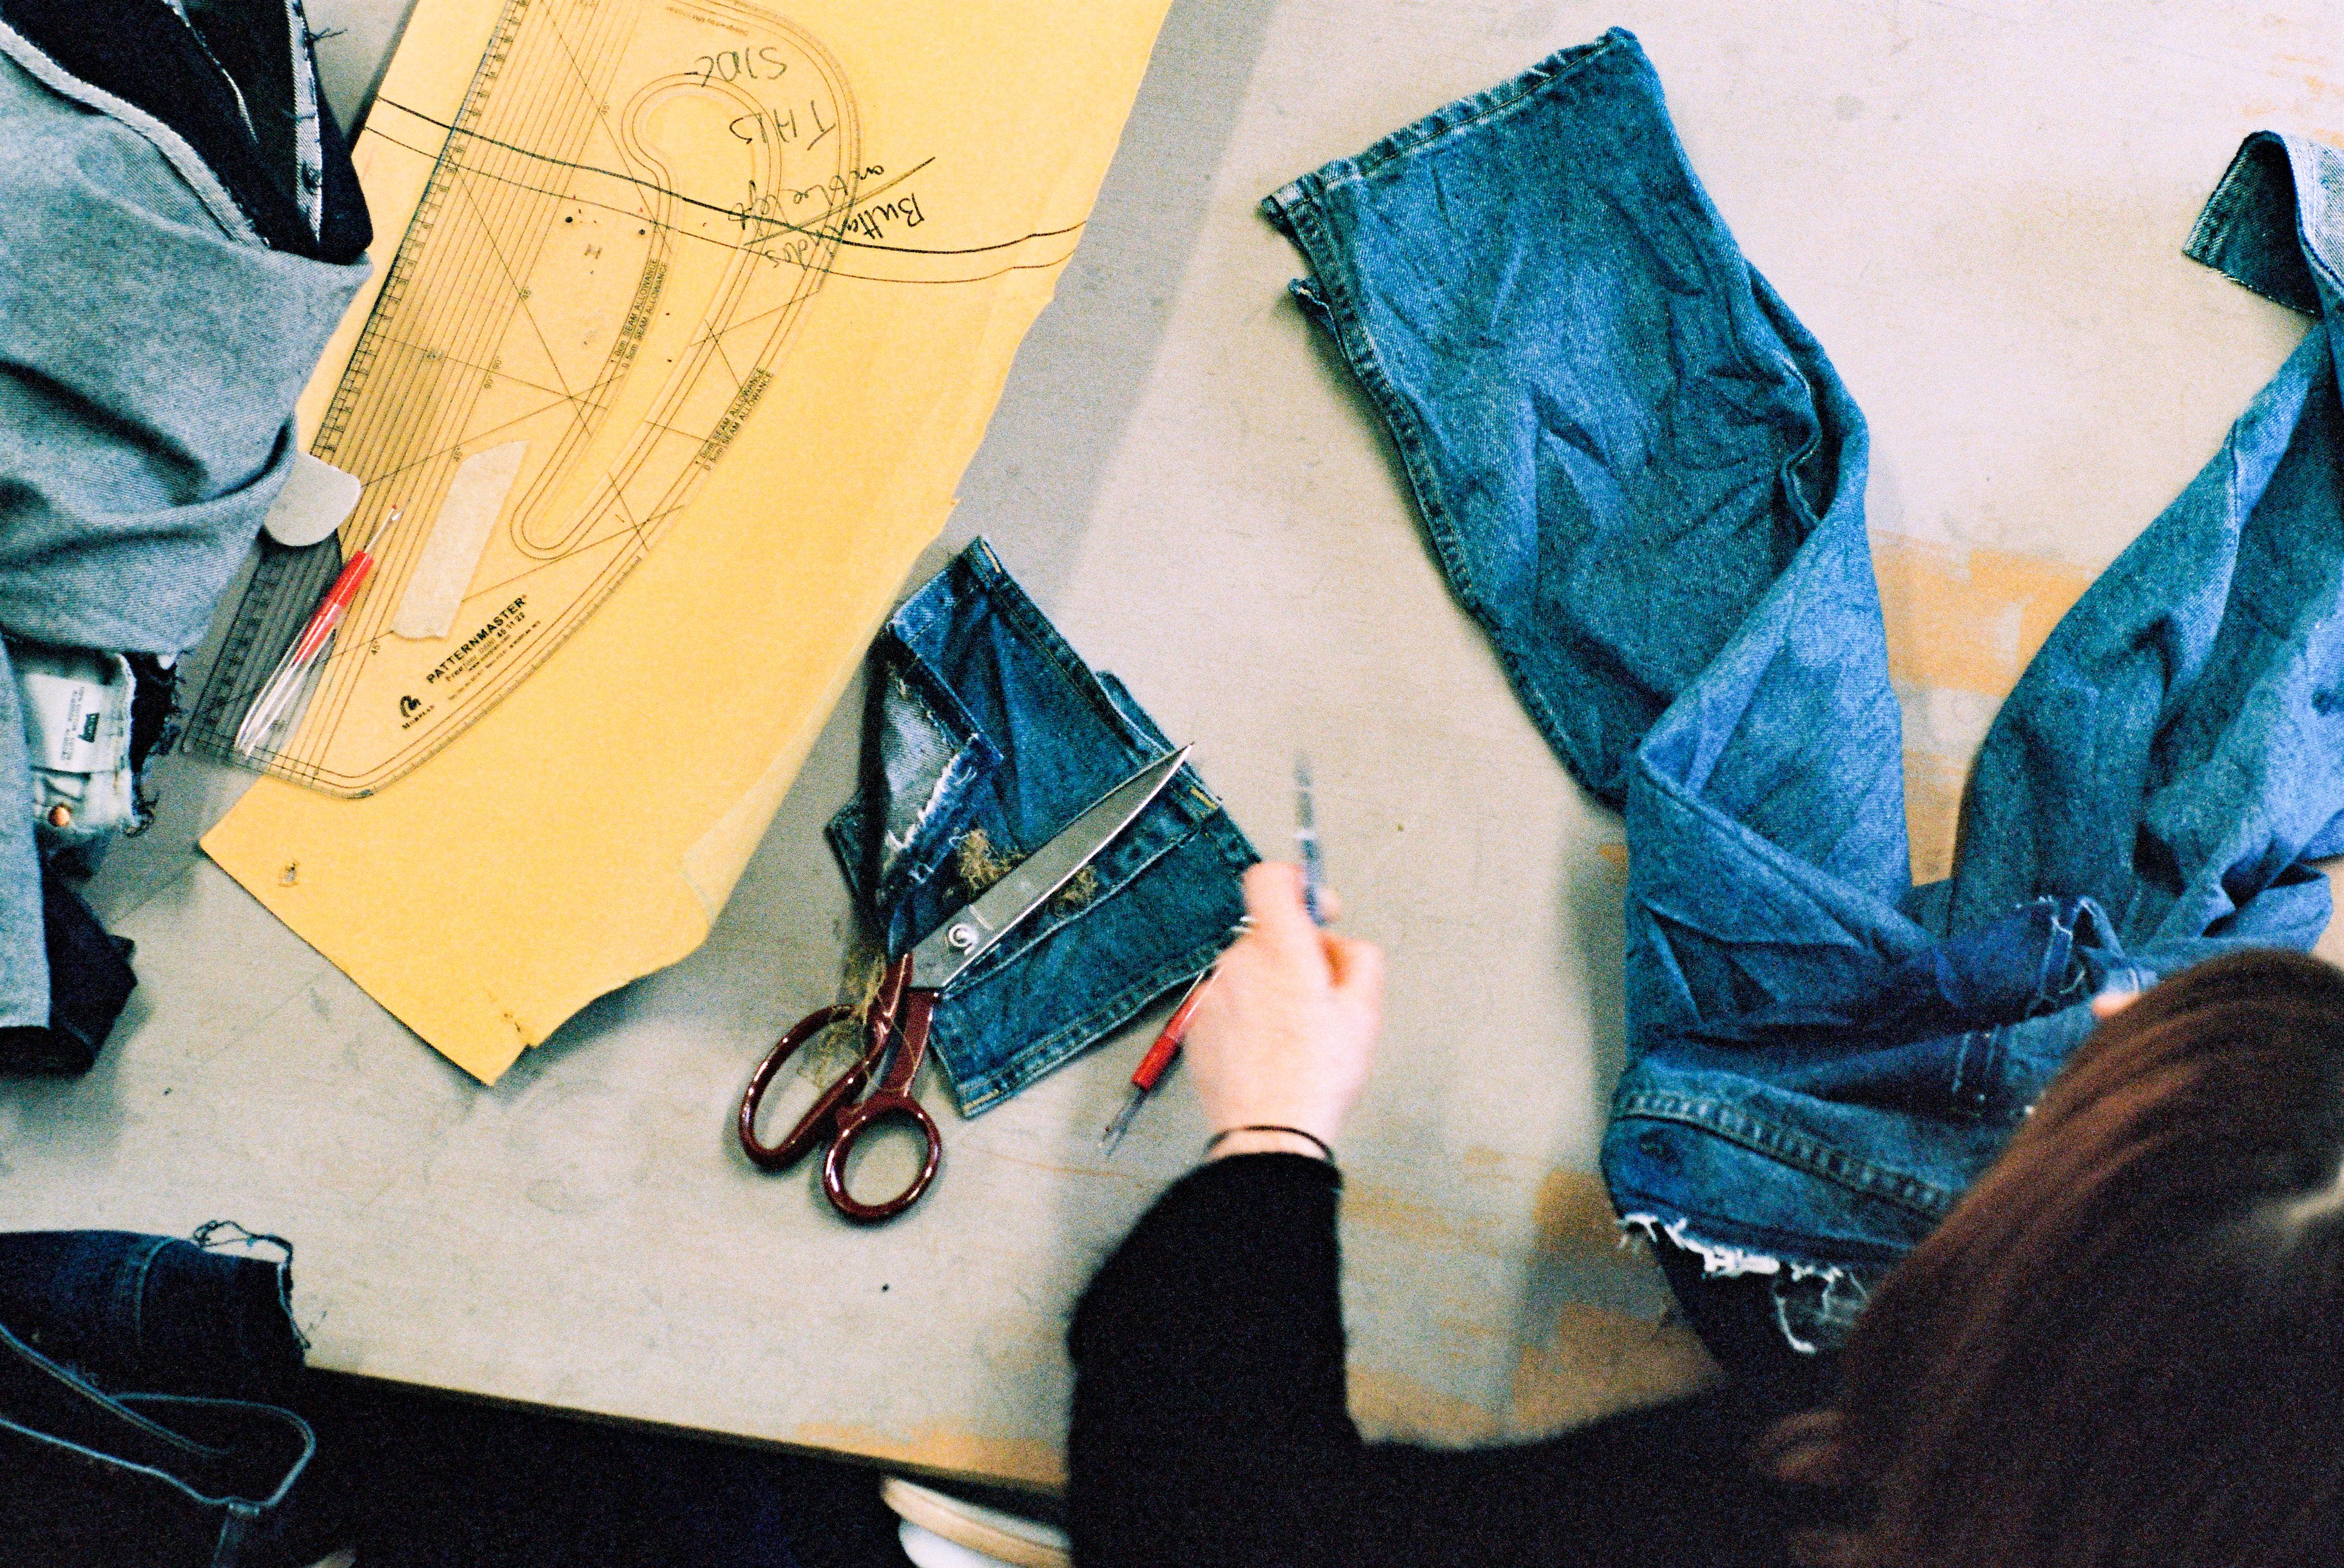 Siobhan, founder of rejean, in the studio pattern cutting